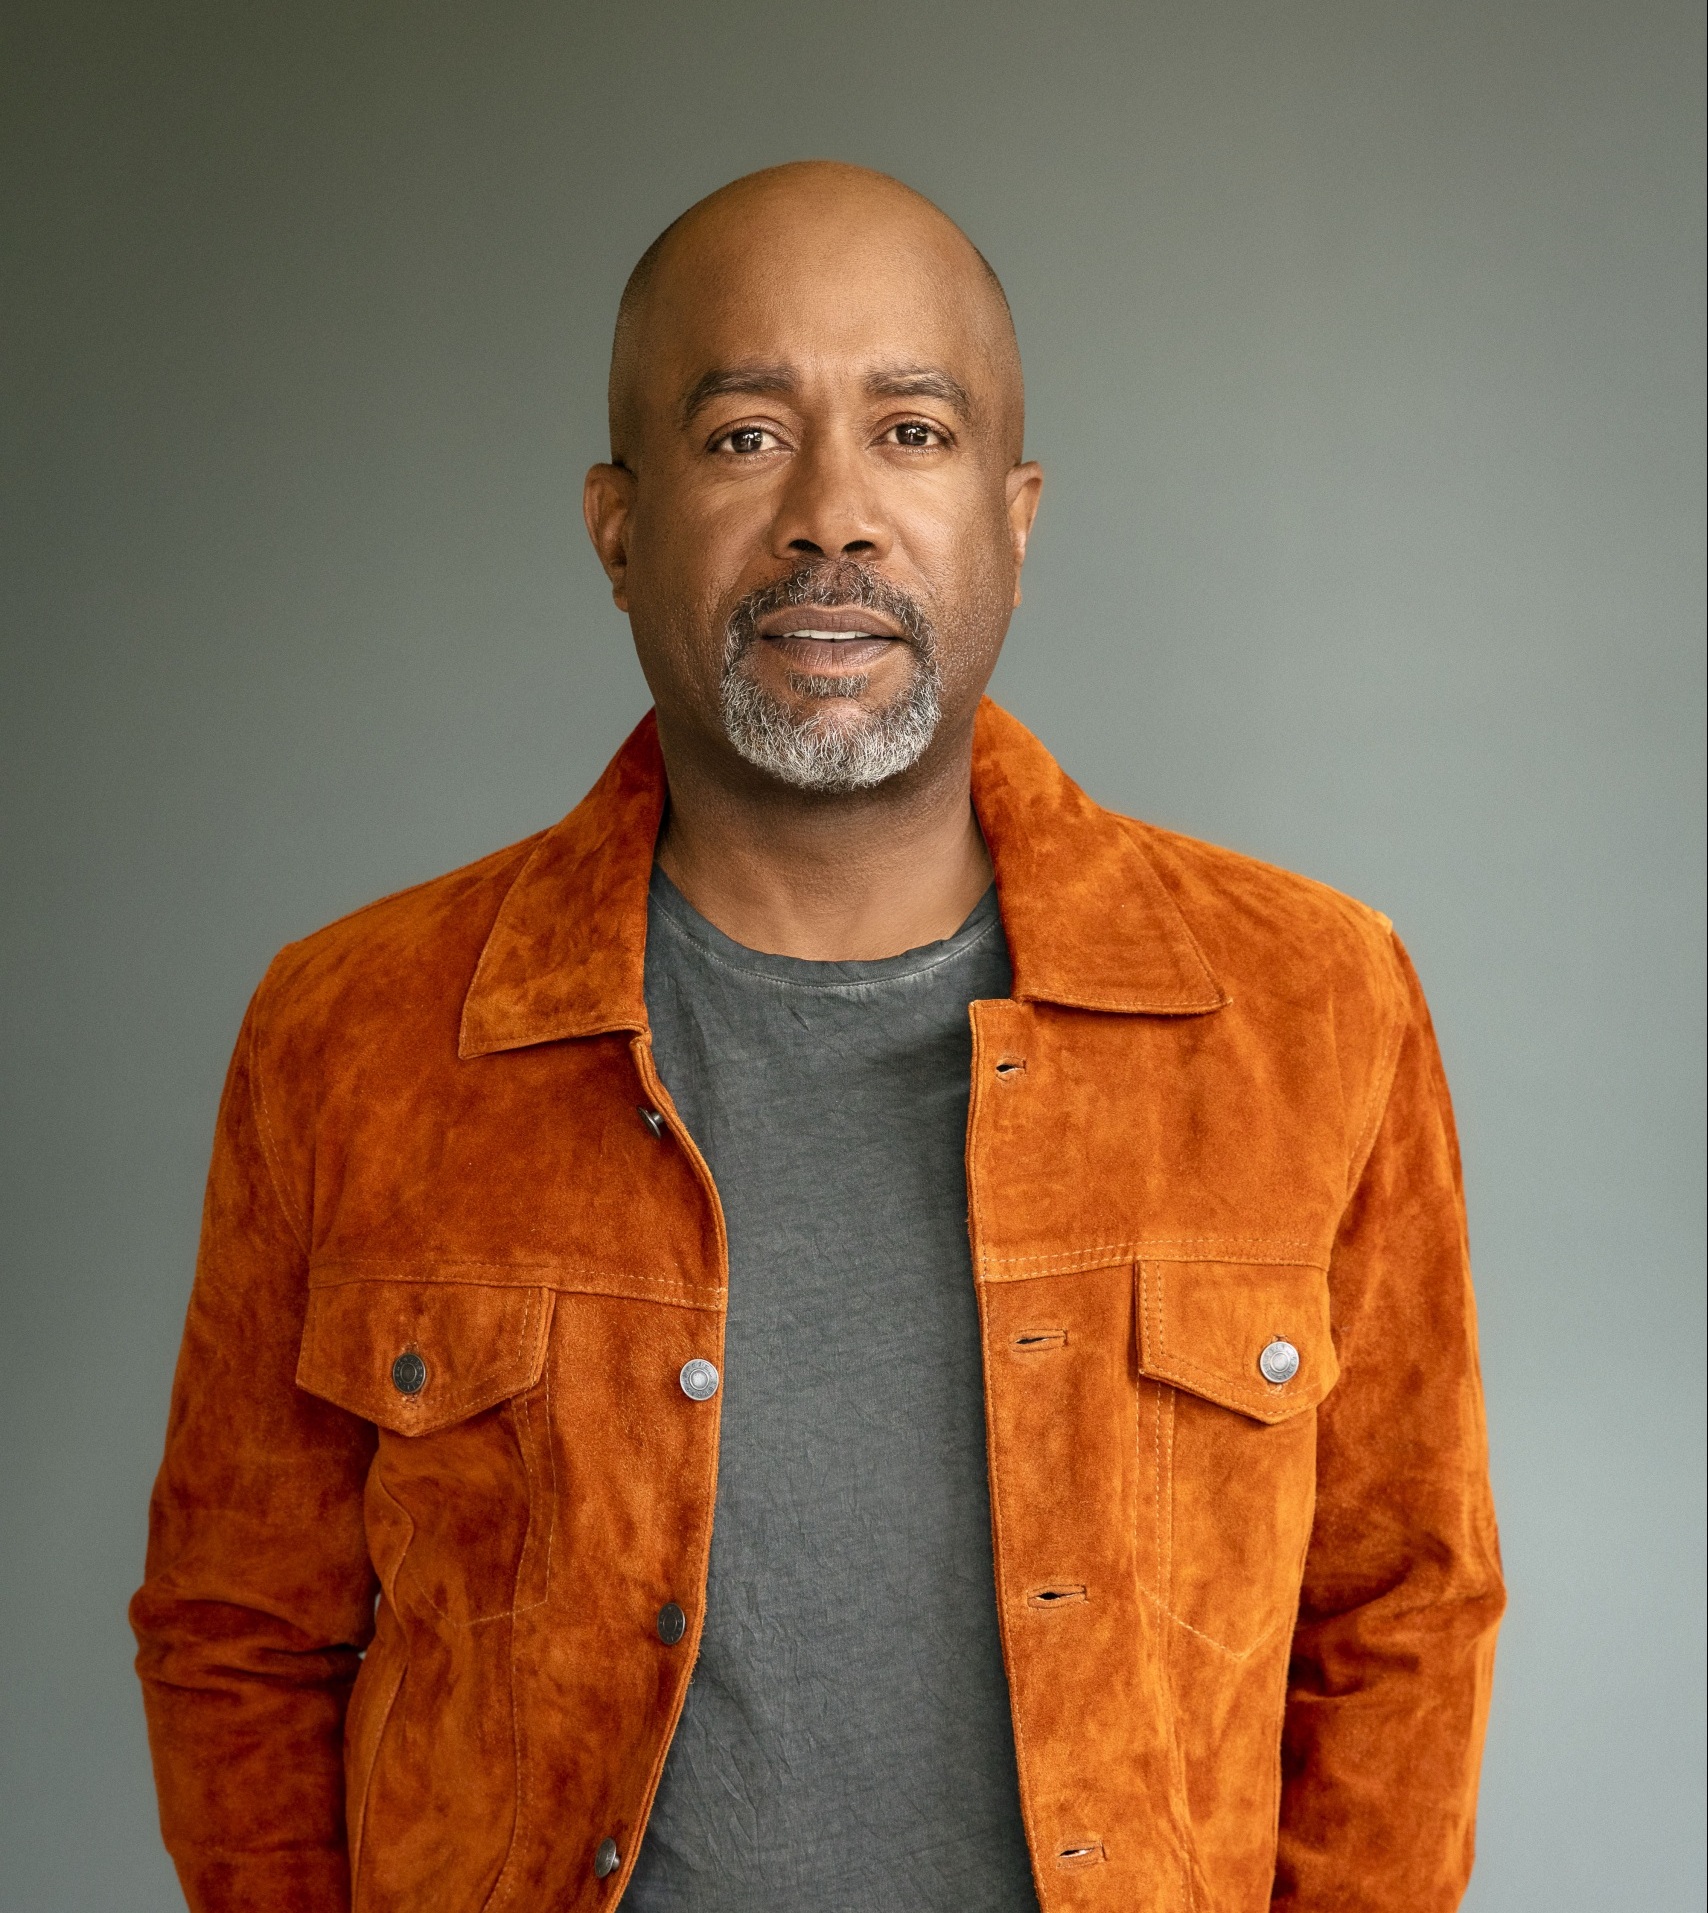 DARIUS RUCKER CHANNELS LAW & ORDER DETECTIVE ELLIOT STABLER FOR HIS LATEST VIDEO.